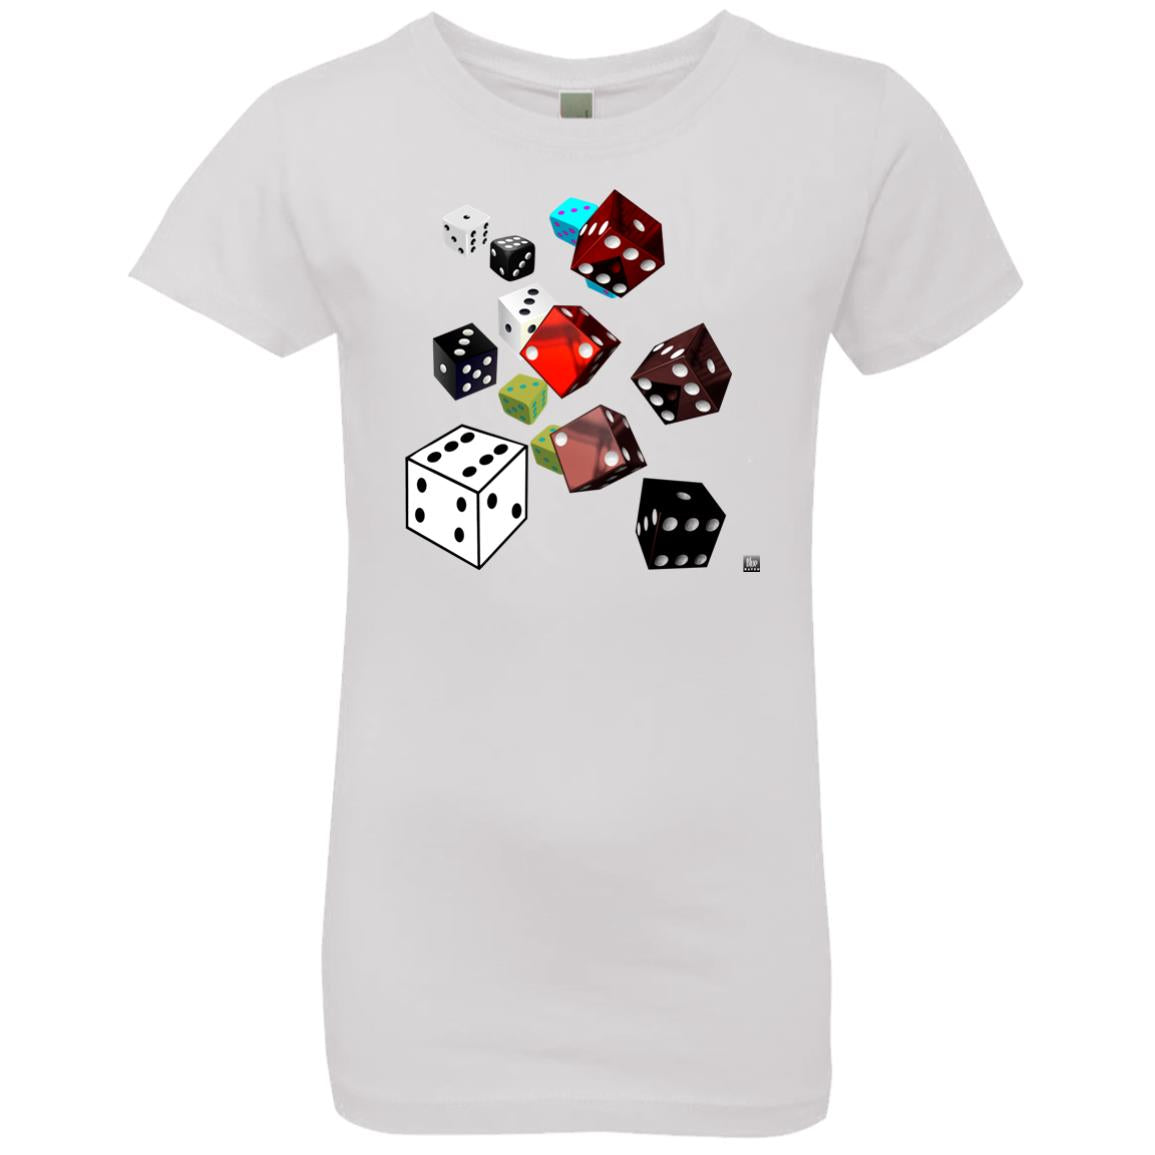 roll of the dice - Girl's Premium Cotton T-Shirt